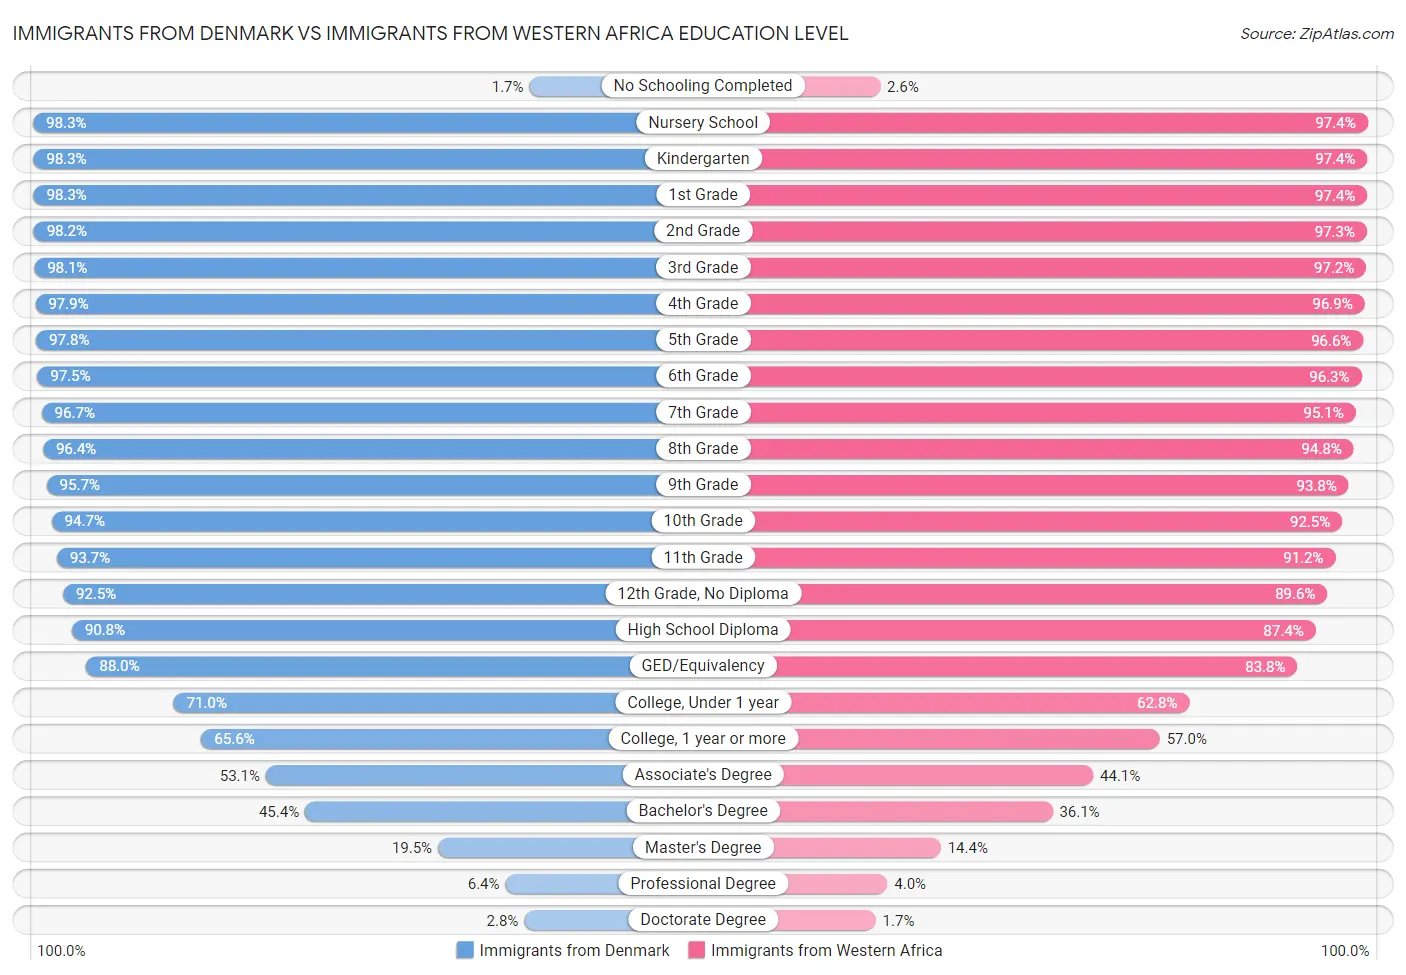 Immigrants from Denmark vs Immigrants from Western Africa Education Level